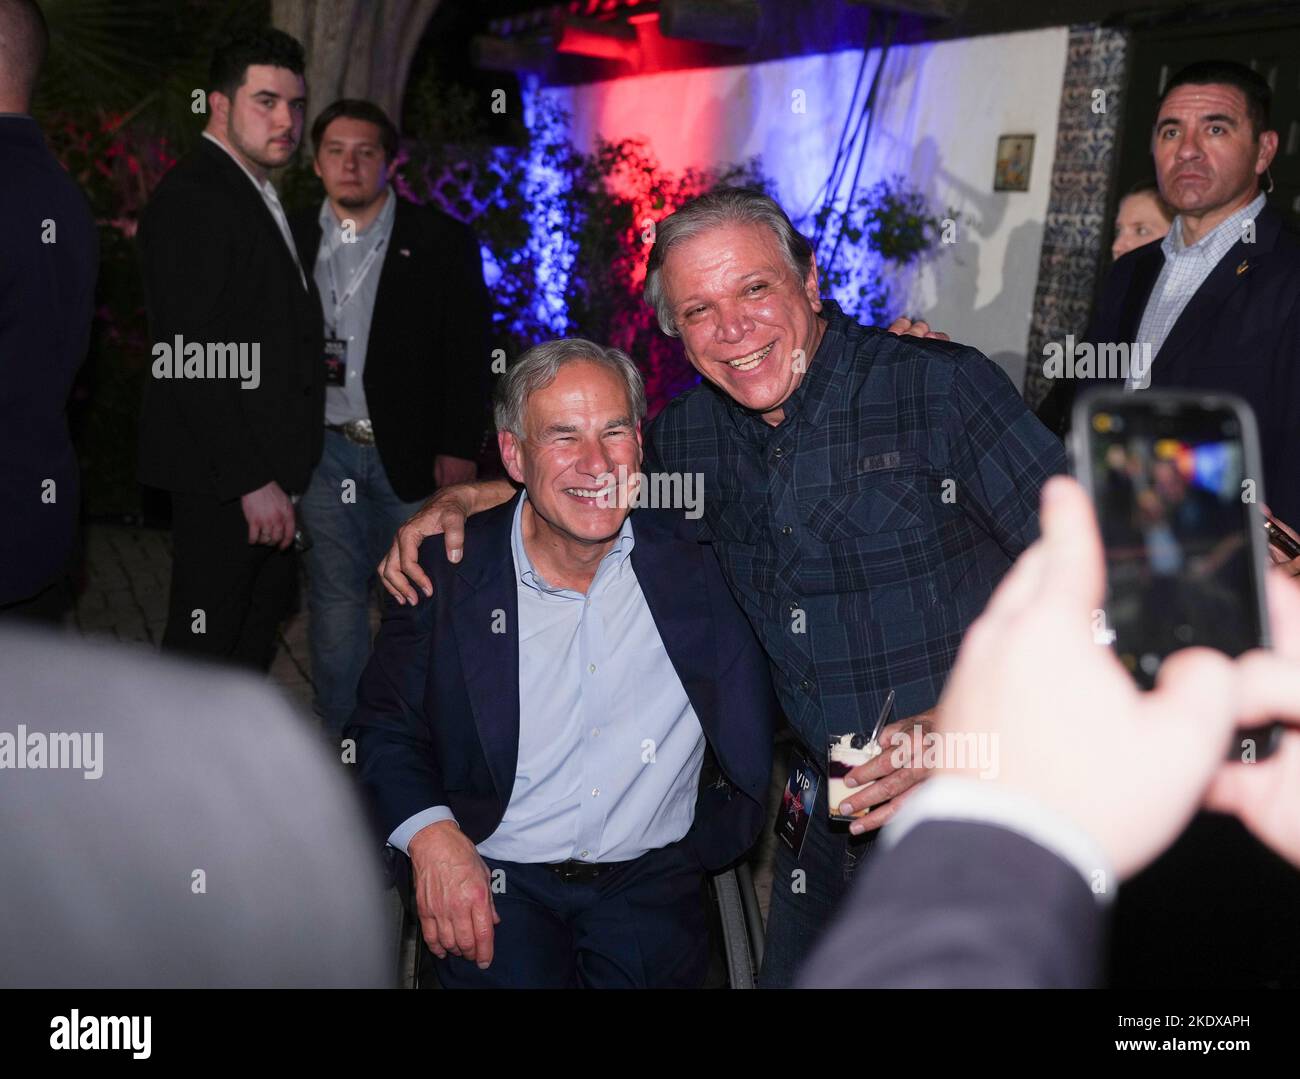 McAllen Texas USA, November 8 2022: Texas Governor GREG ABBOTT revels in a re-election victory over Democratic challenger Beto O'Rourke during an election-night watch party. At right is ARTURO FLORES of Edinburg, Texas Credit: Bob Daemmrich/Alamy Live News Stock Photo